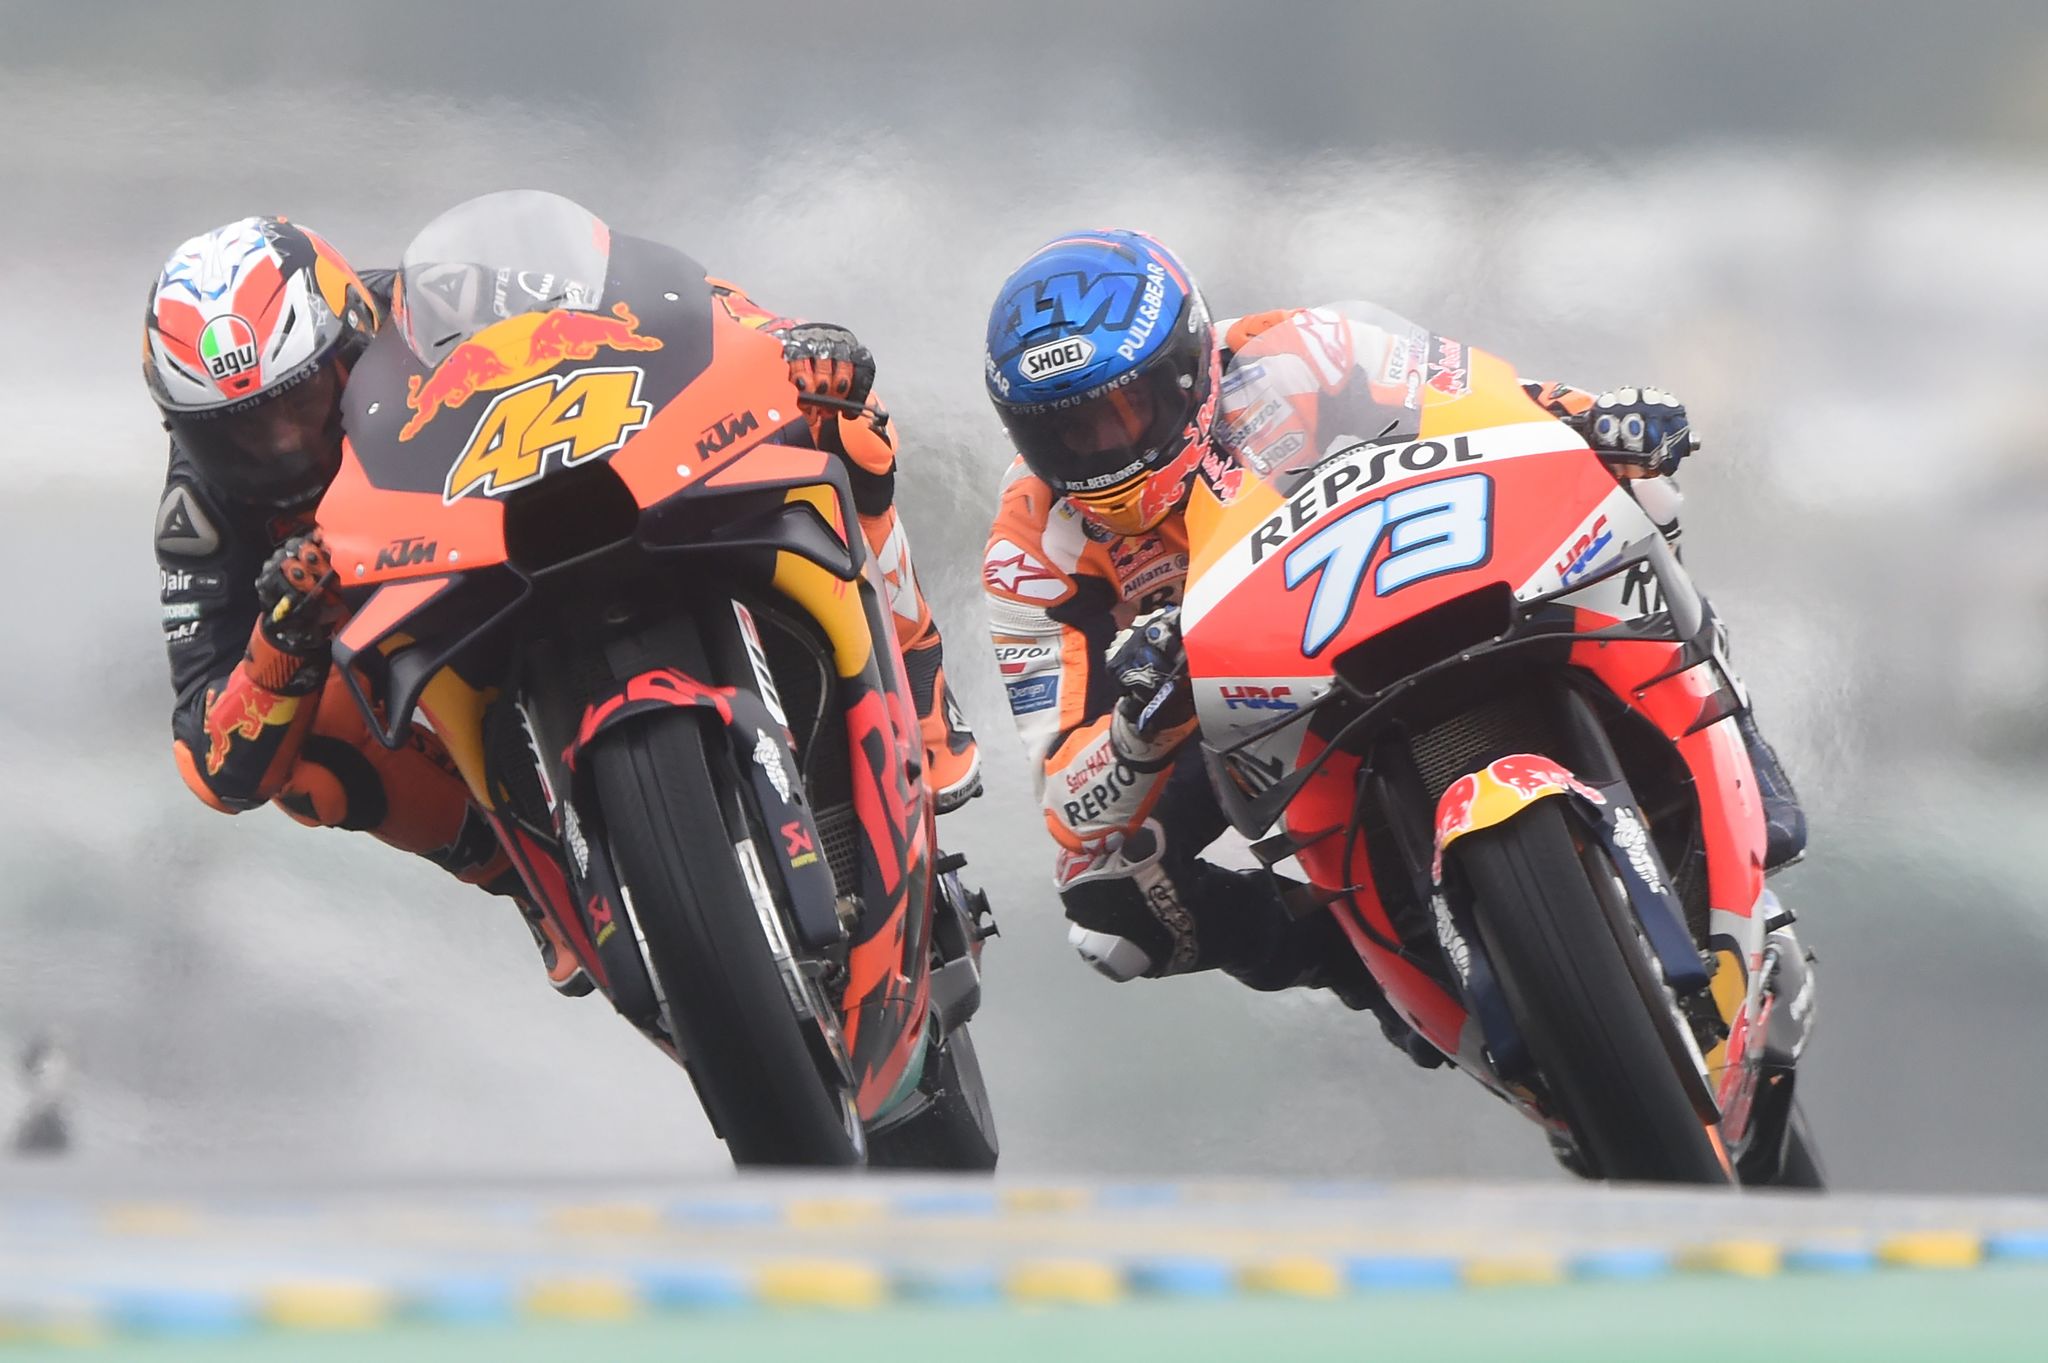 (From L) Red Bull KTM Factory Racing's Spanish rider Pol Espargaro, compete ahead of Repsol Honda Team's Spanish rider lt;HIT gt;Alex lt;/HIT gt; lt;HIT gt;Marquez lt;/HIT gt; during the French MotoGP race in Le Mans northwestern France, on October 11, 2020. (Photo by JEAN-FRANCOIS MONIER / AFP)